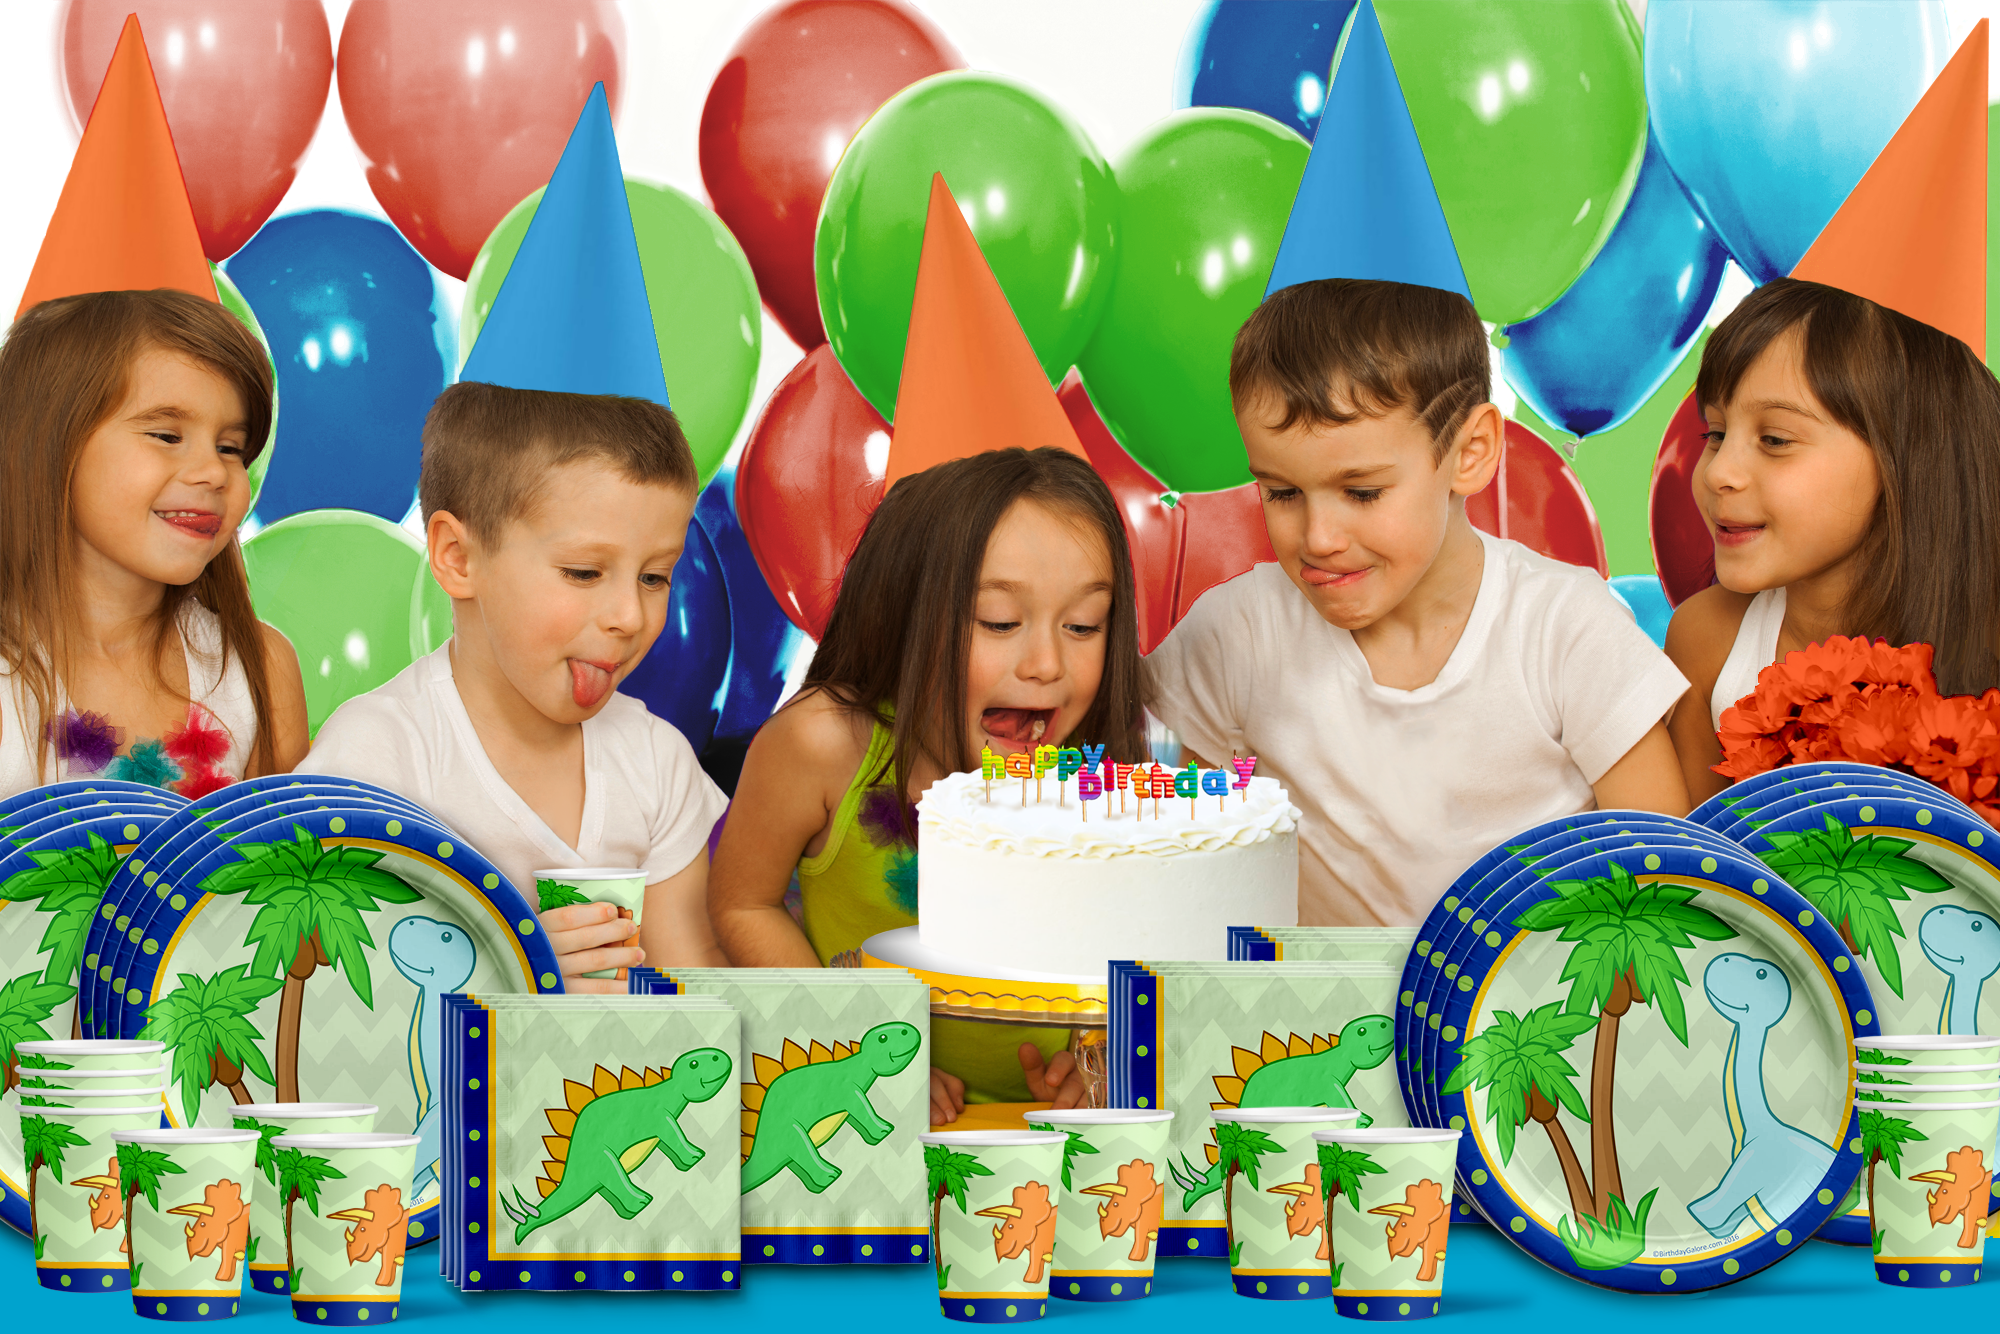 Little Dino Dinosaur Birthday Party Tableware Kit For 16 Guests - BirthdayGalore.com